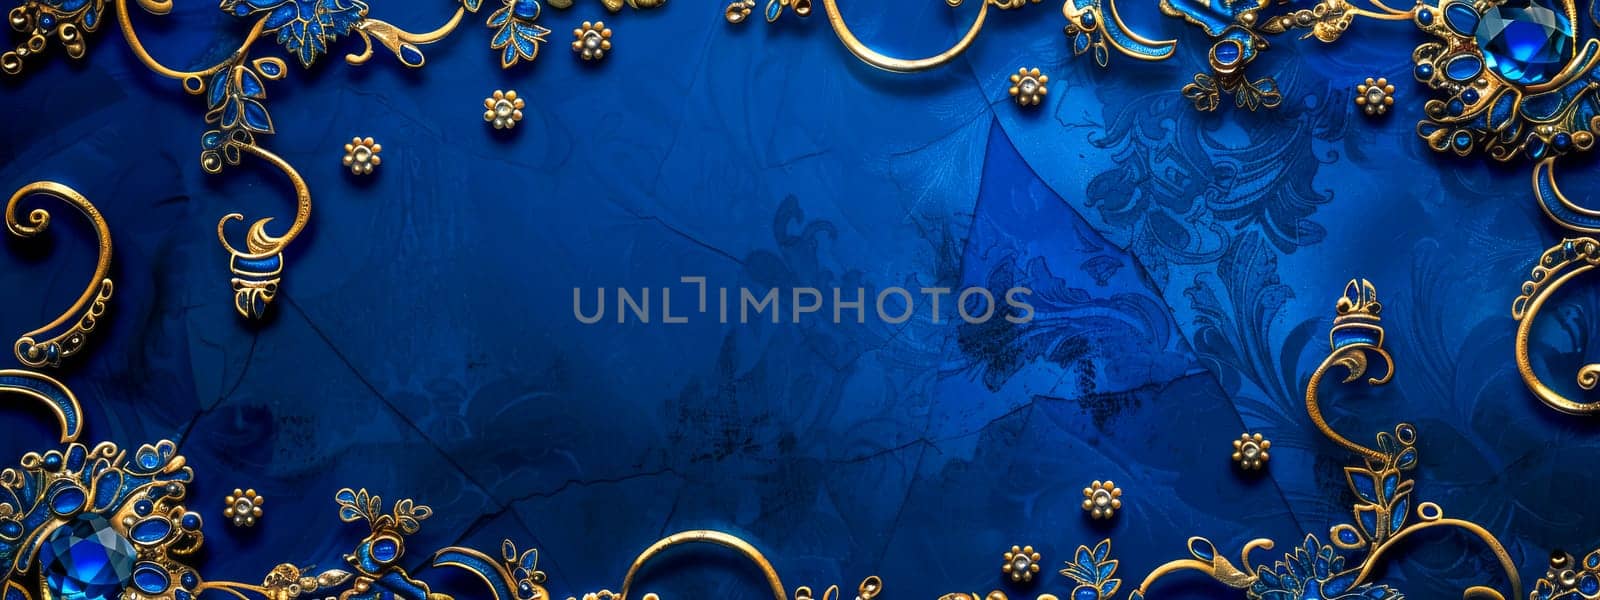 Elegant blue and gold floral background by Edophoto